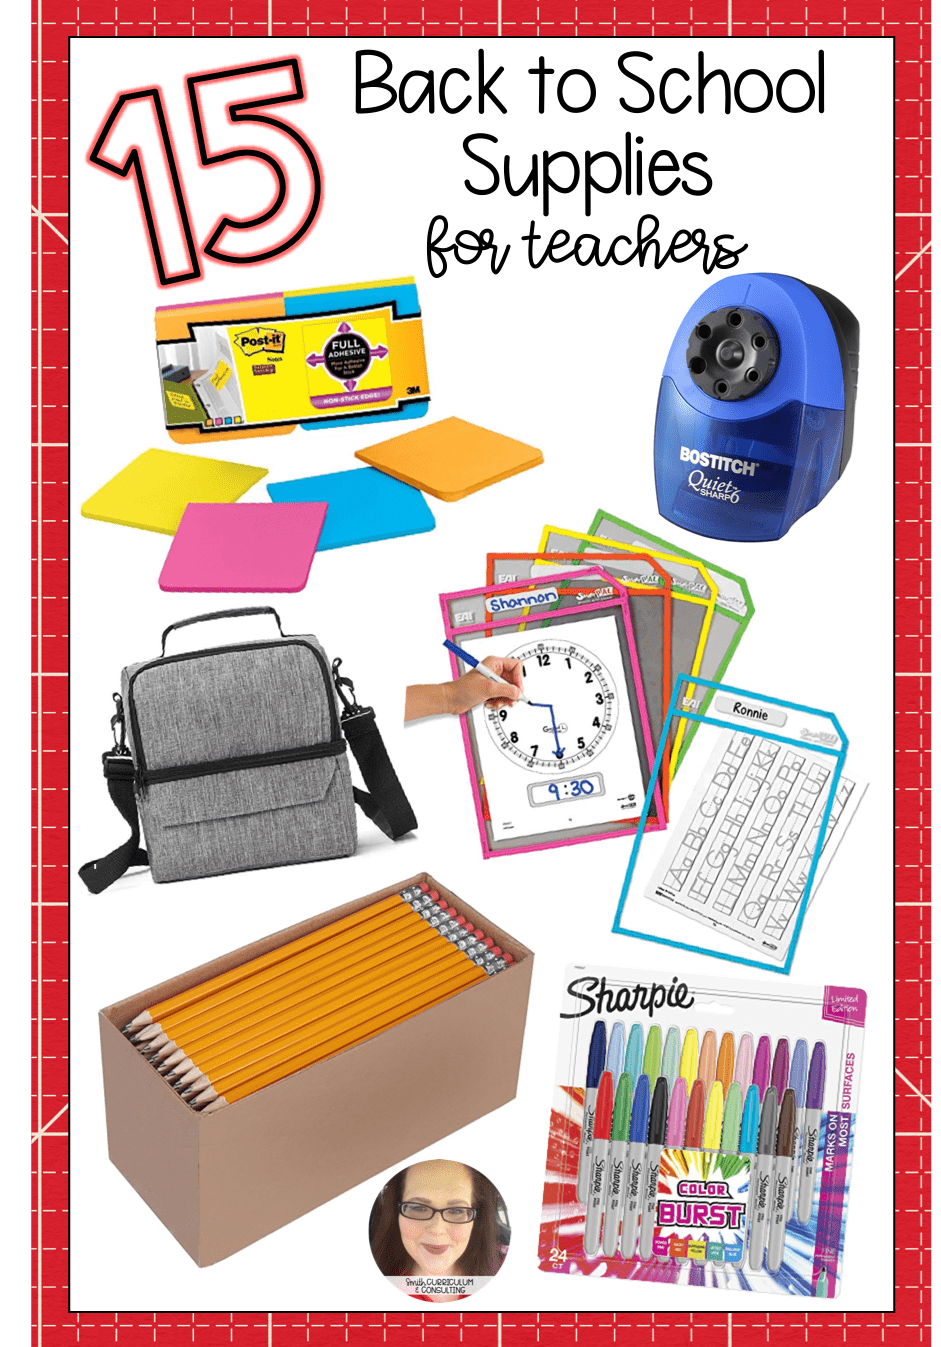 https://smithcurriculumconsulting.com/wp-content/uploads/2018/08/15-Back-to-School-Supplies-for-Teachers.png